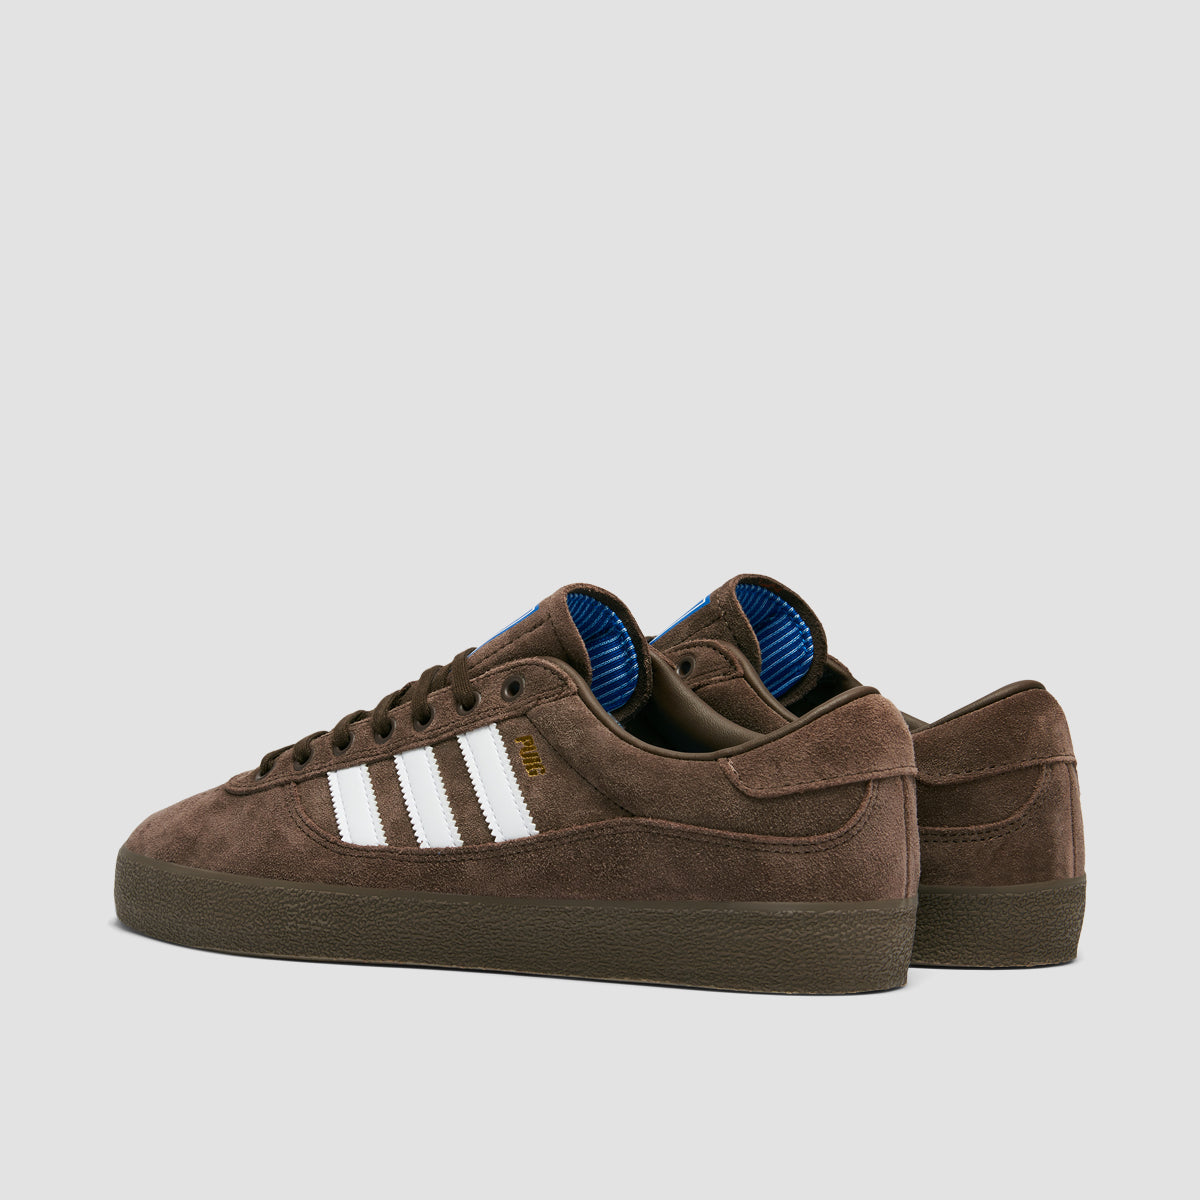 adidas Puig Indoor Shoes - Brown/Ftwr White/Bluebird